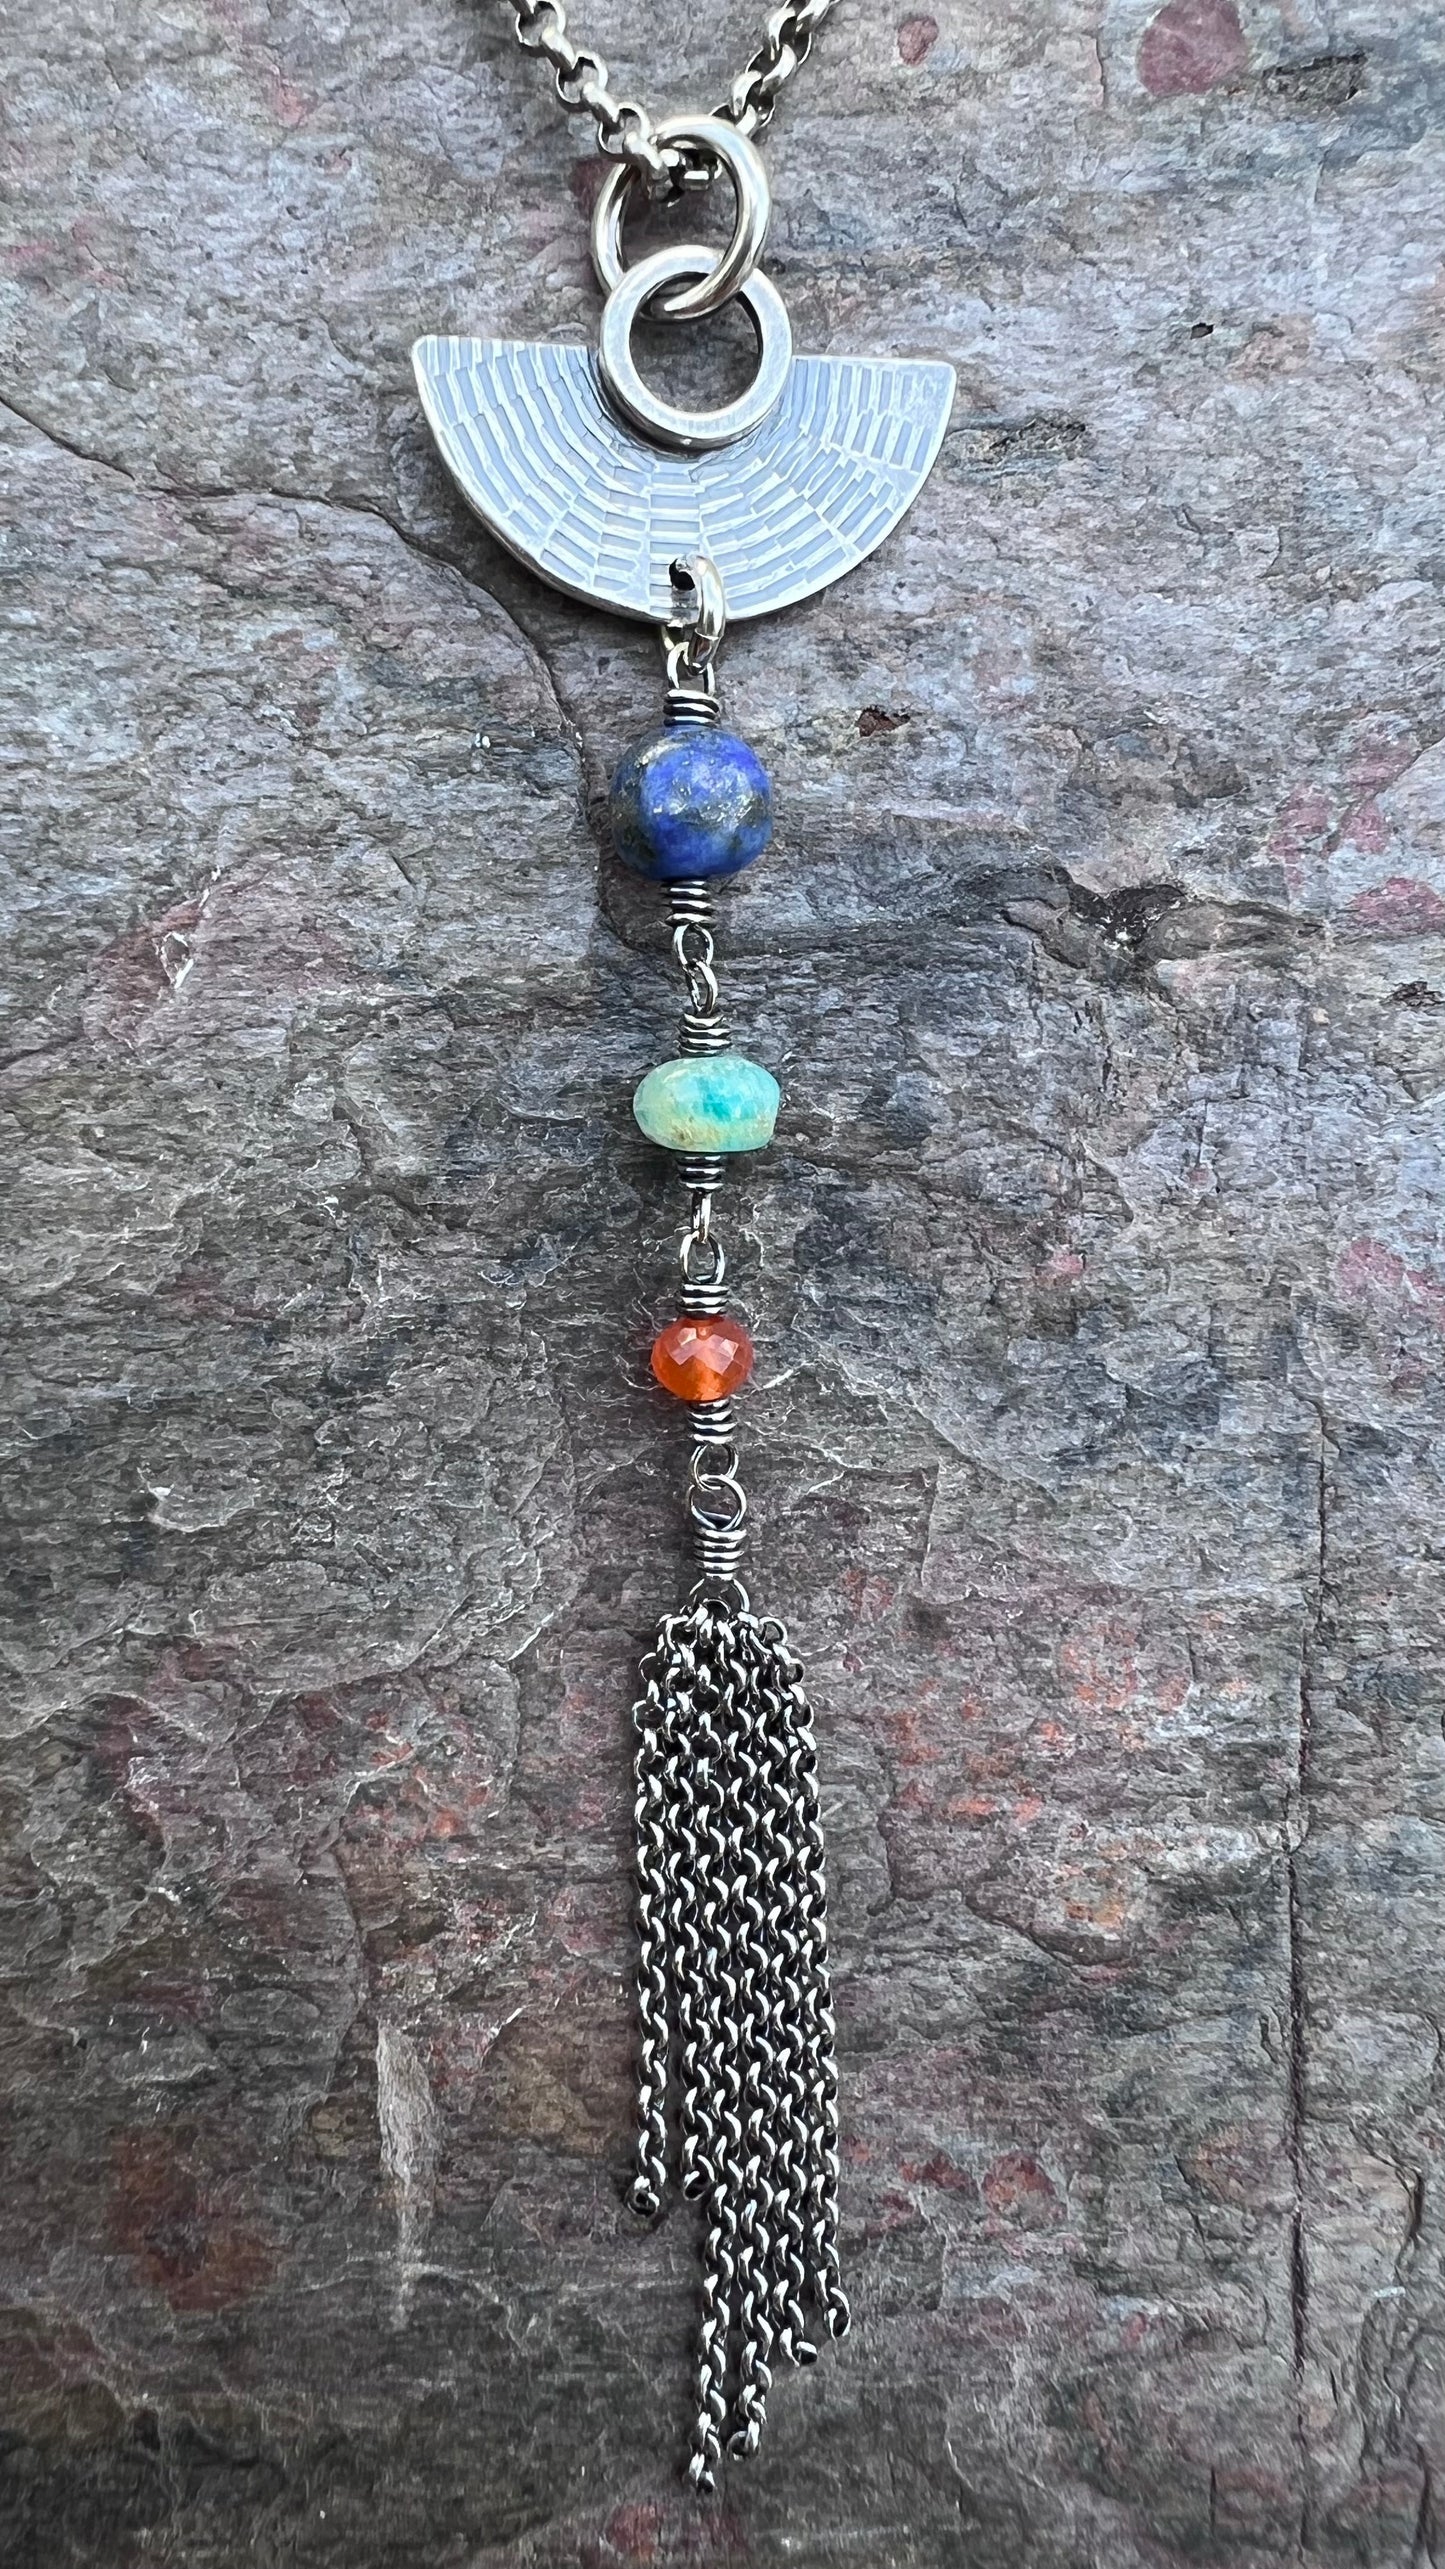 Lapis Lazuli, Amazonite, and Carnelian Necklace - Genuine Stone and Sterling Silver Pendant on Sterling Silver Chain